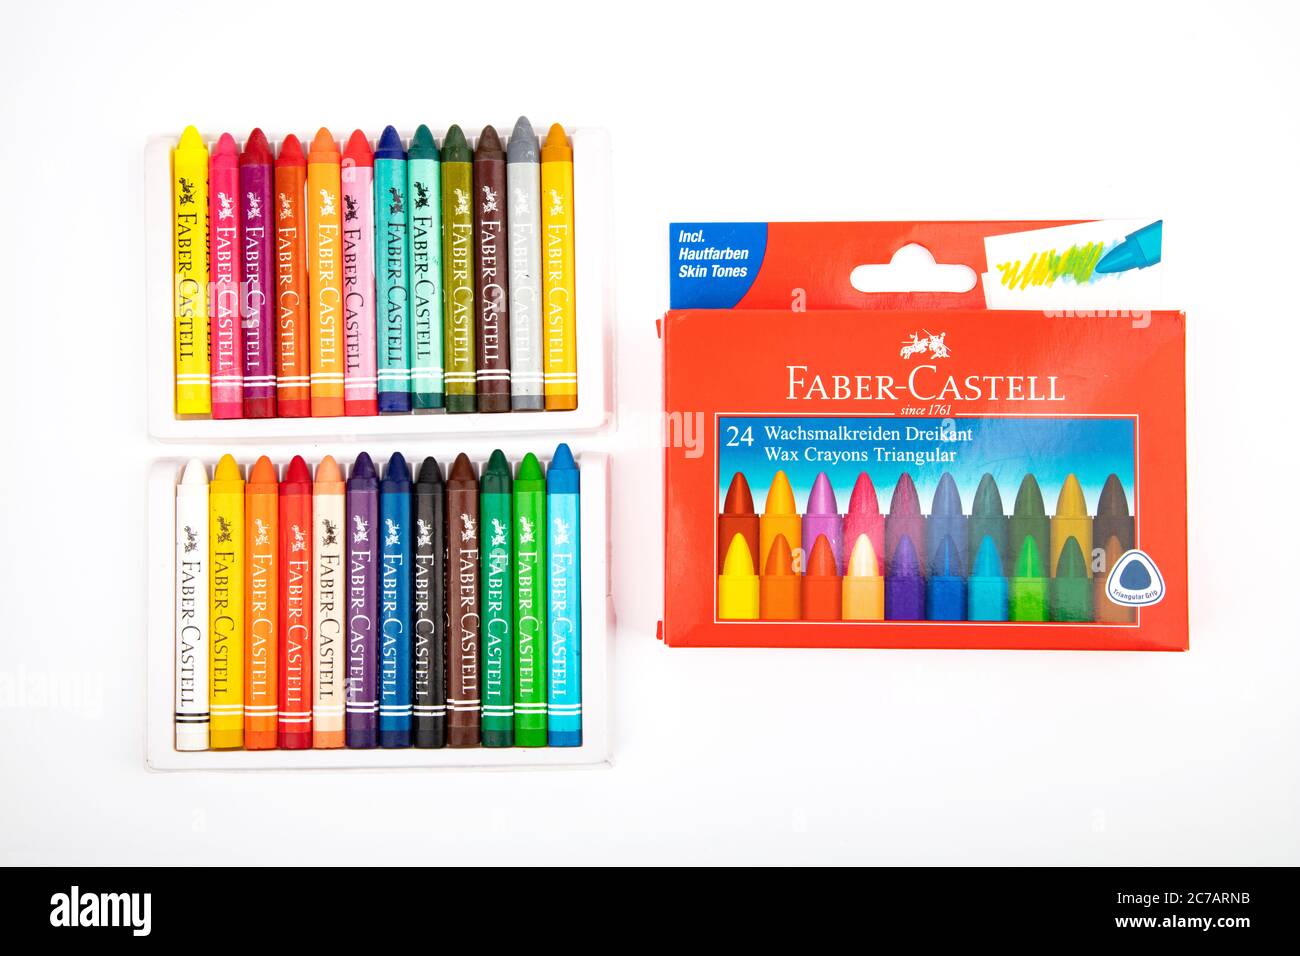 WETZLAR, GERMANY 2020 04 05 FABER CASTELL Wax Crayons. FABER CASTELL  founded in 1761 in Germany. Products for writing, drawing, creative designs  Stock Photo - Alamy